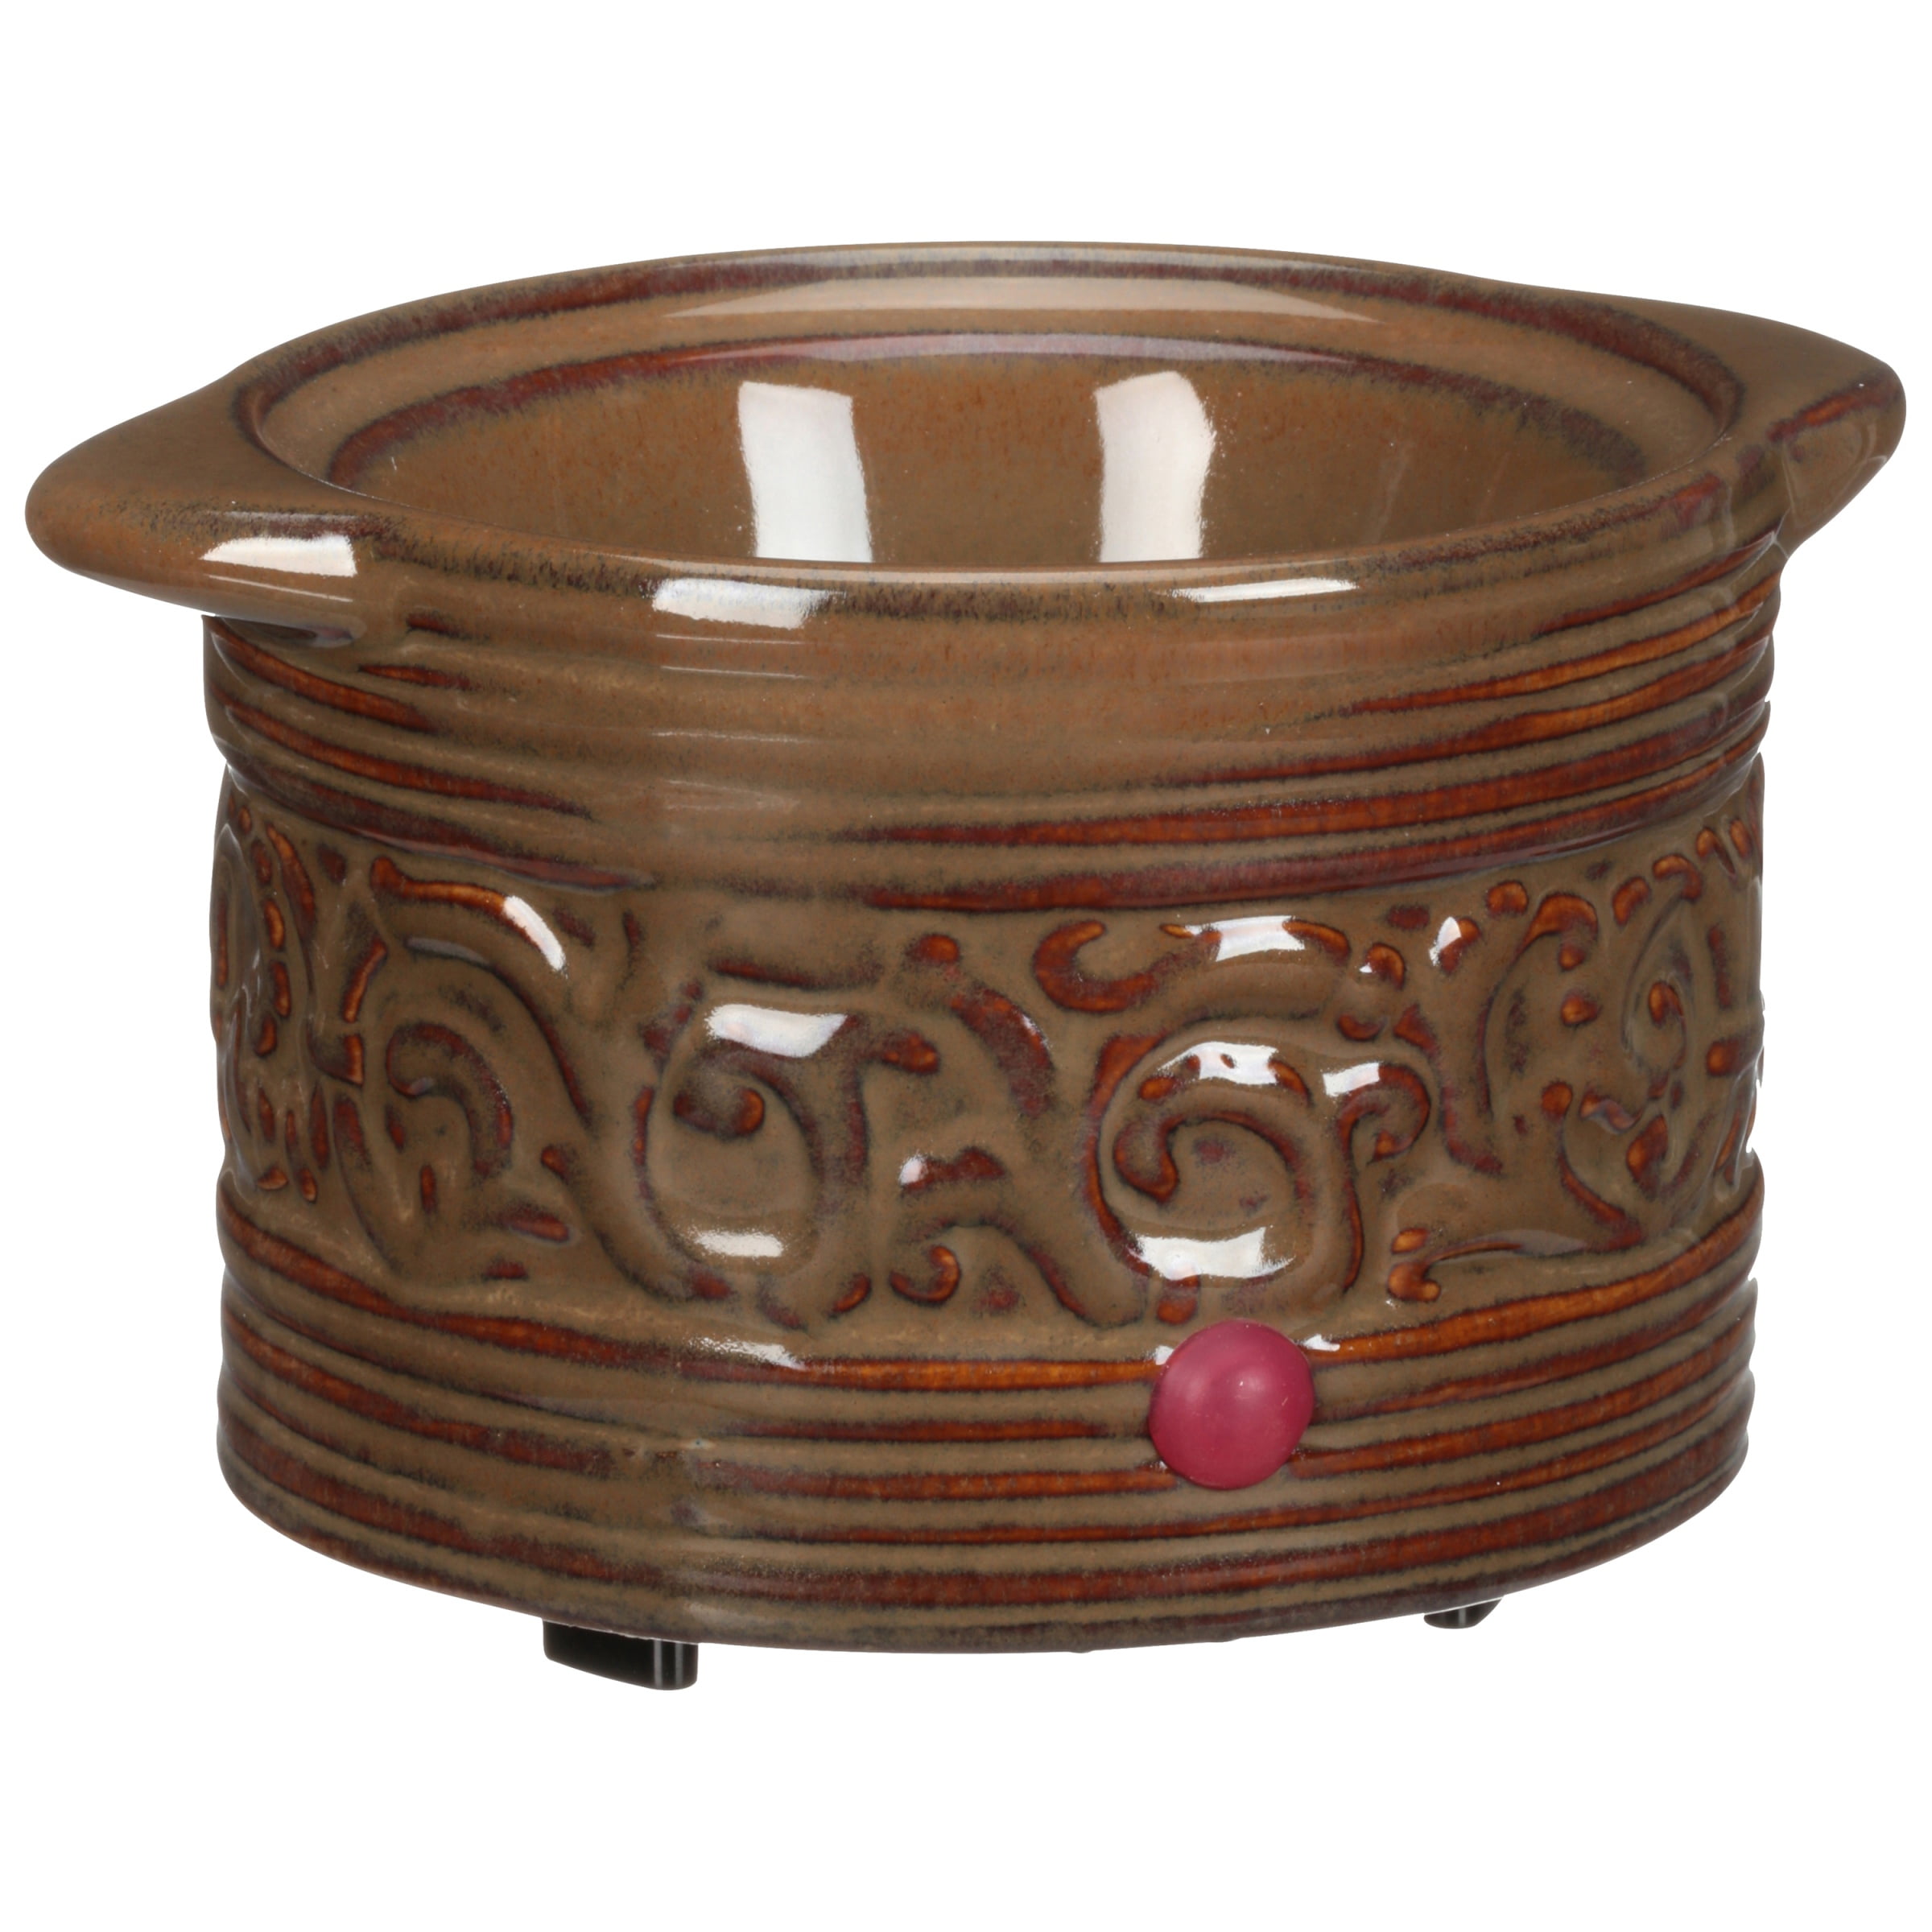 Hosley's 5 High Electric Potpourri Pot Ceramic - 110volts. Ideal Gift for  Weddings, Party, spa, Reiki, Meditation. P1